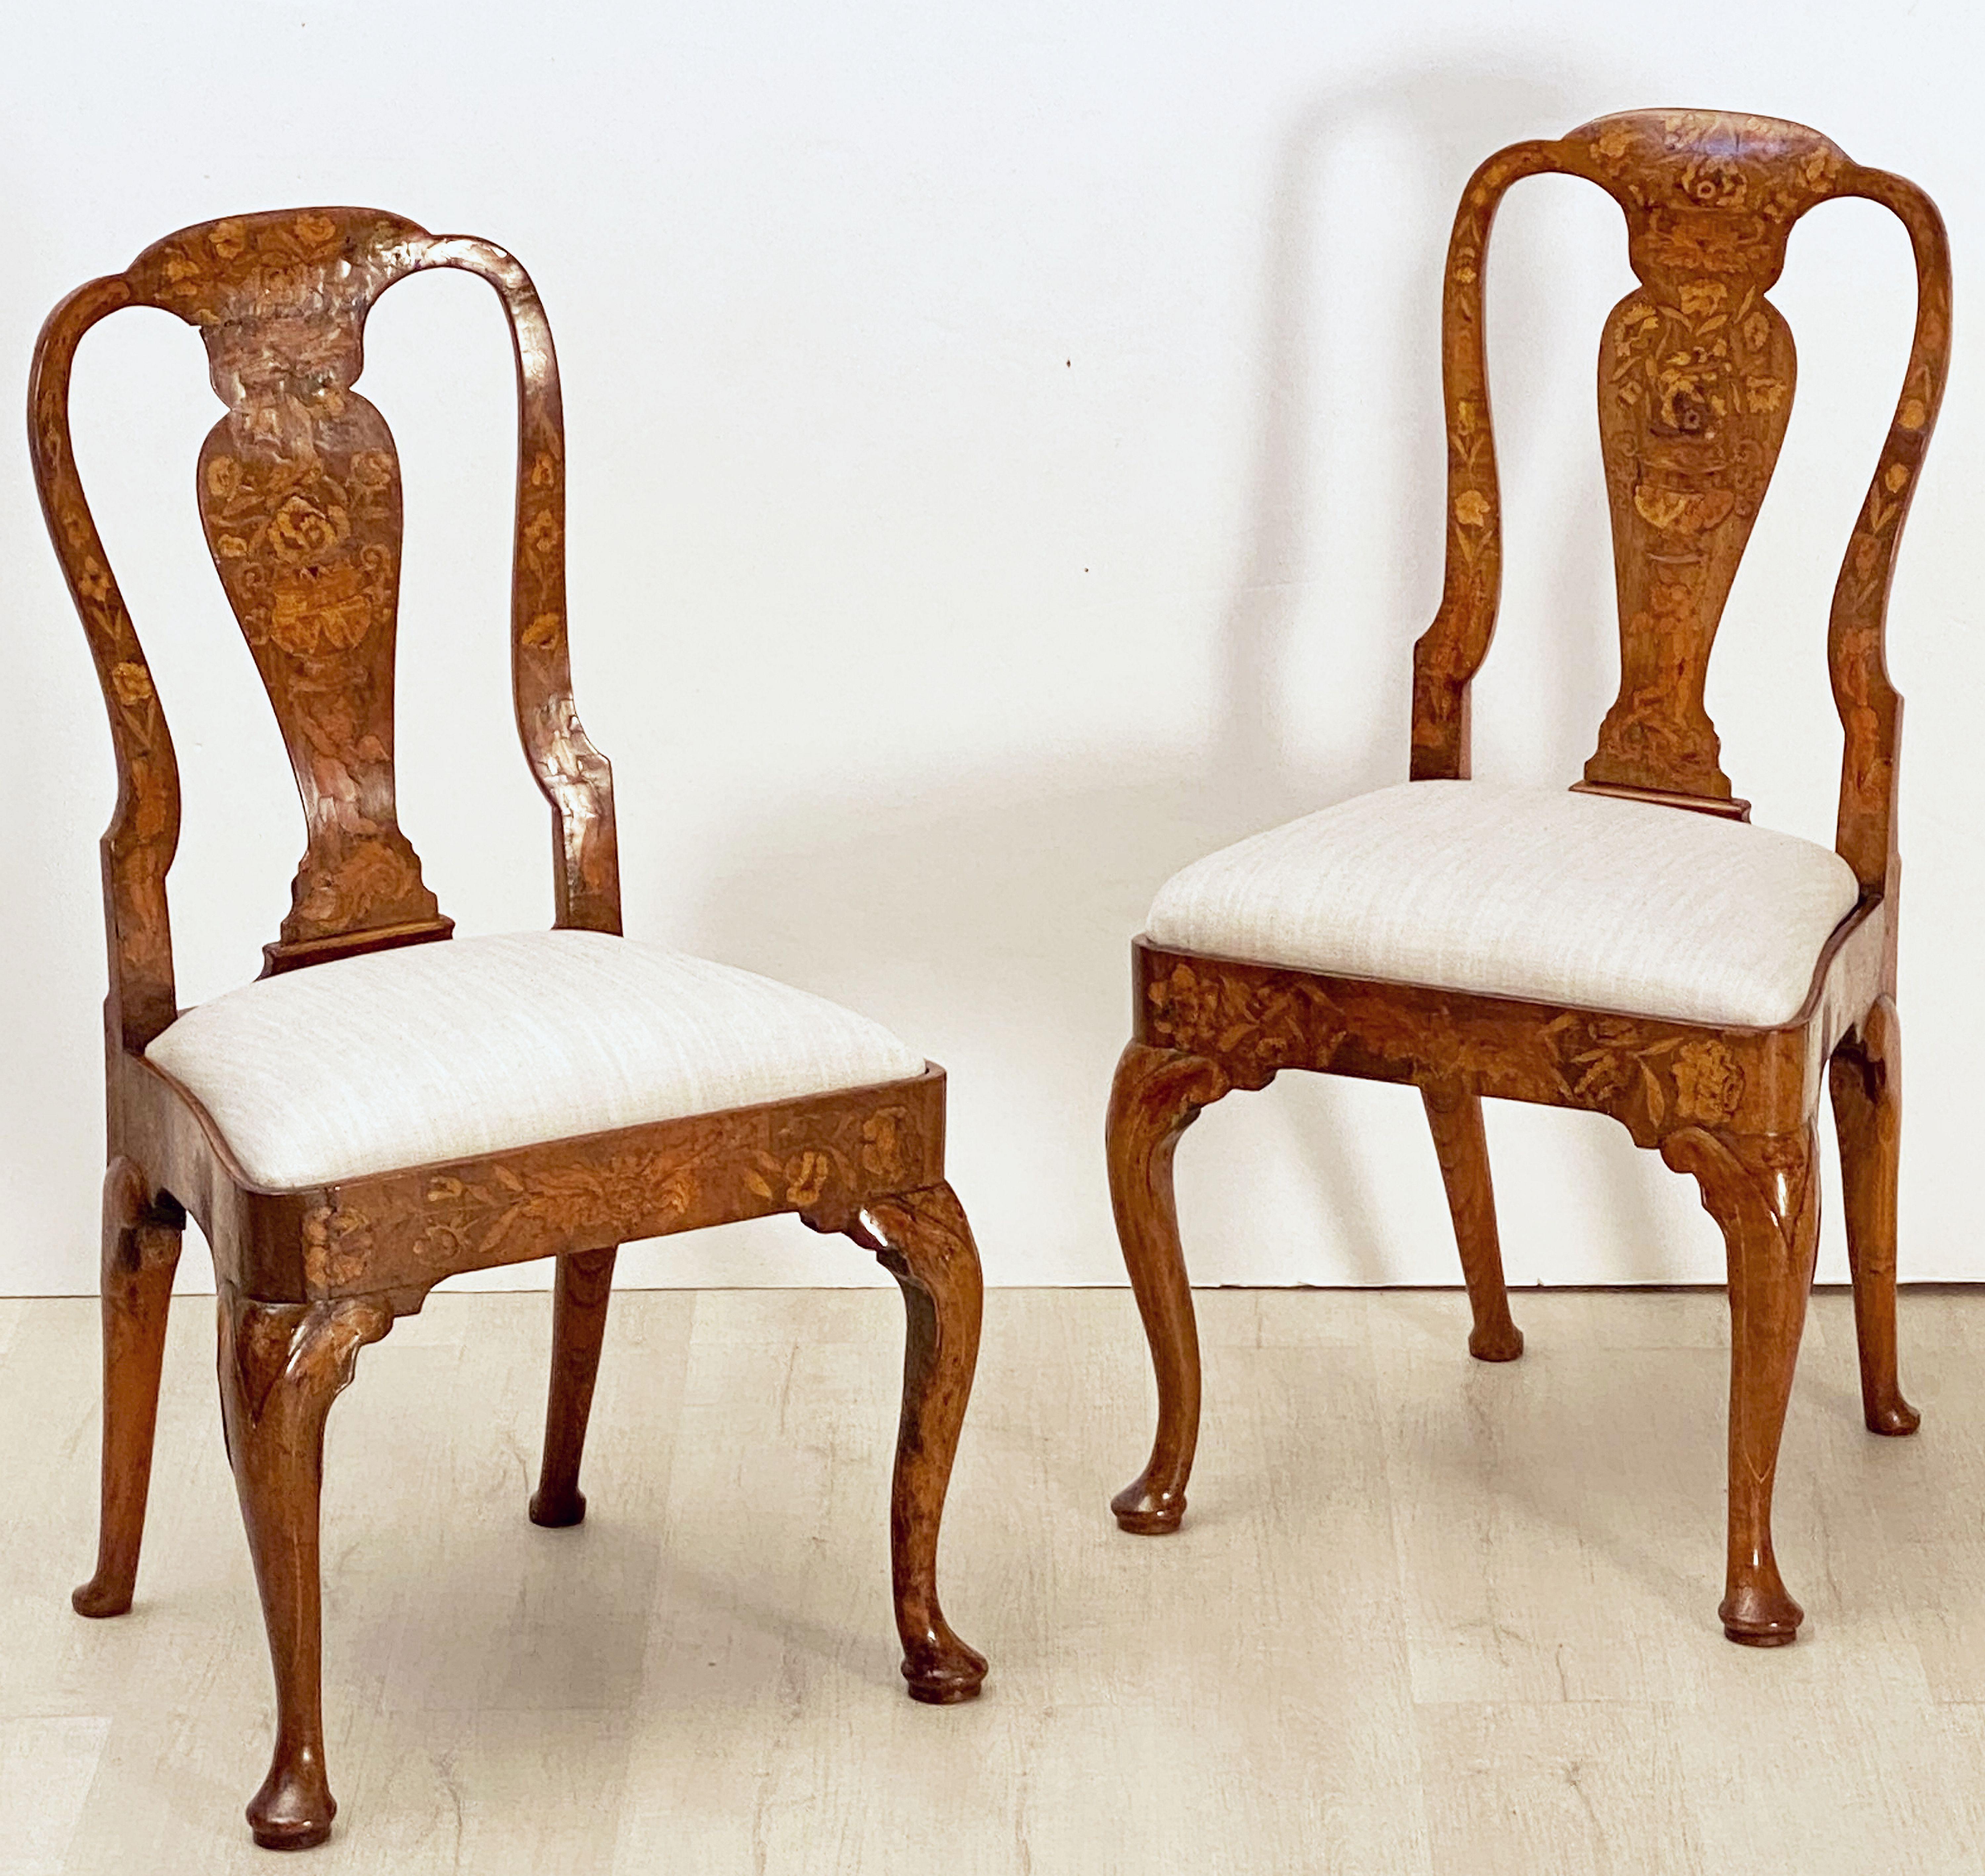 A very fine pair of Dutch marquetry chairs of elm and walnut from the early 19th century - each chair featuring an inlaid design of a cherub holding up a vase and urn with flowers to the back, over a frame with upholstered seat and resting on